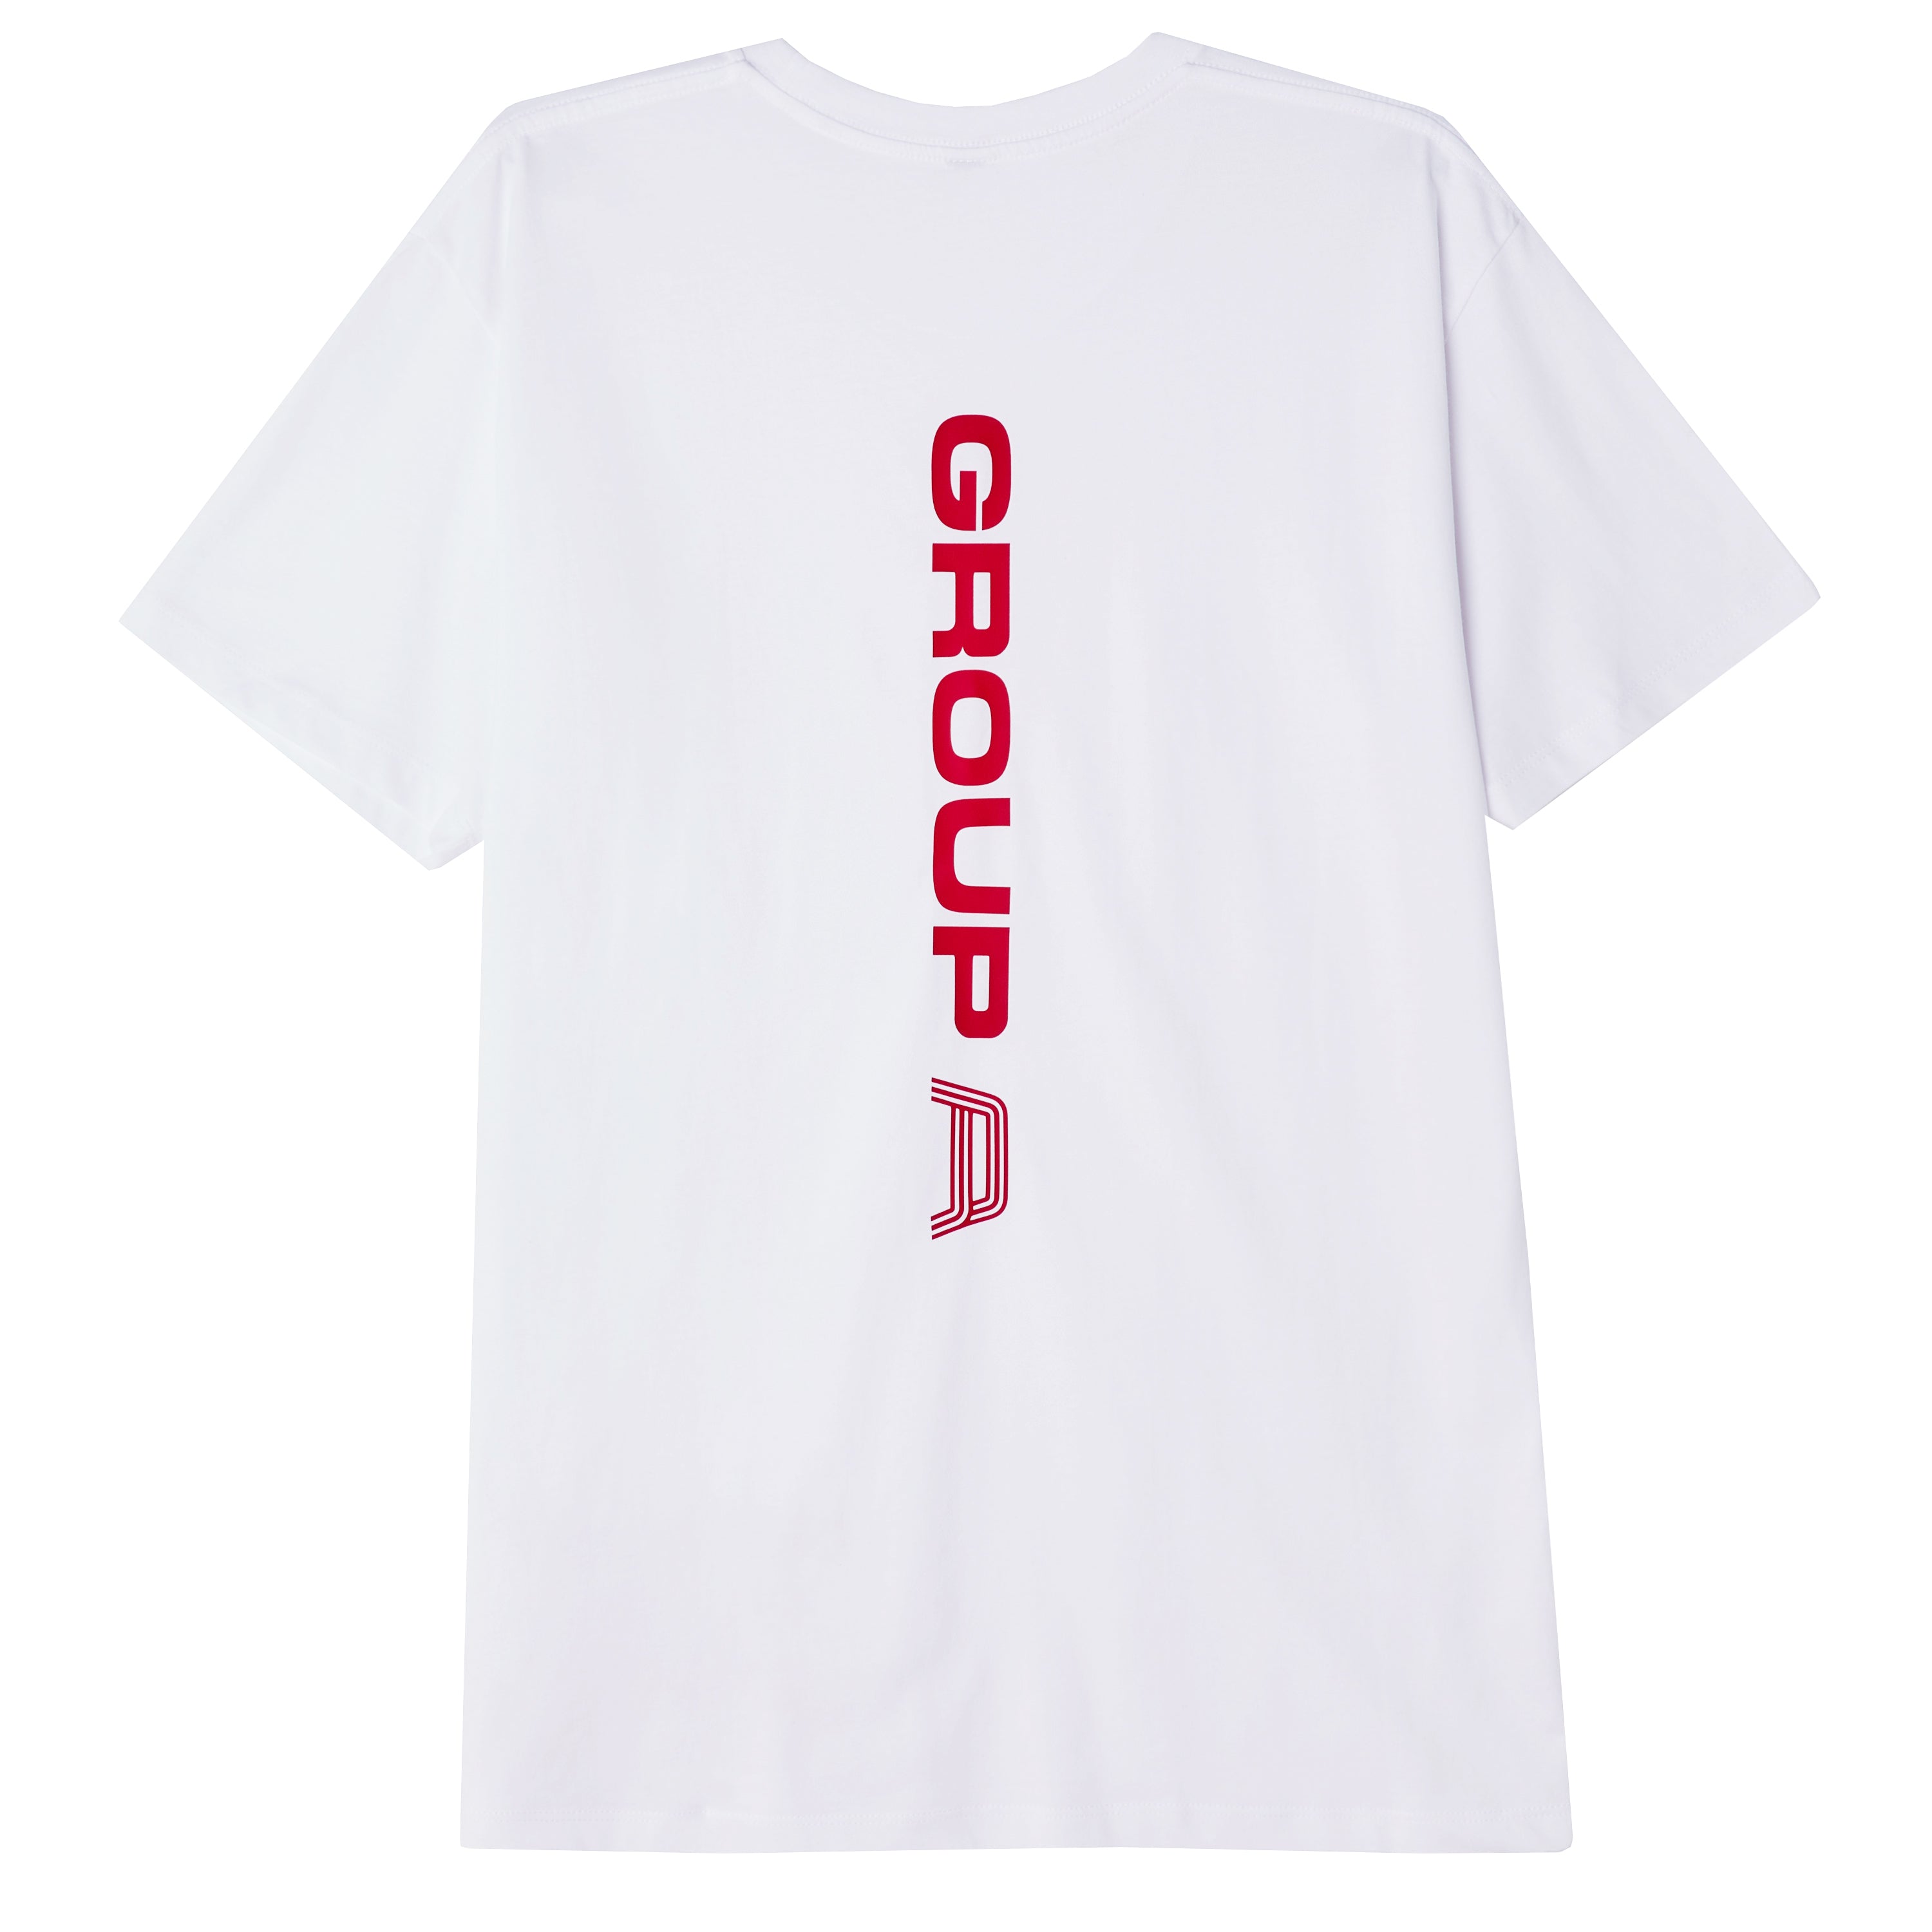 Drop Line - White/Red